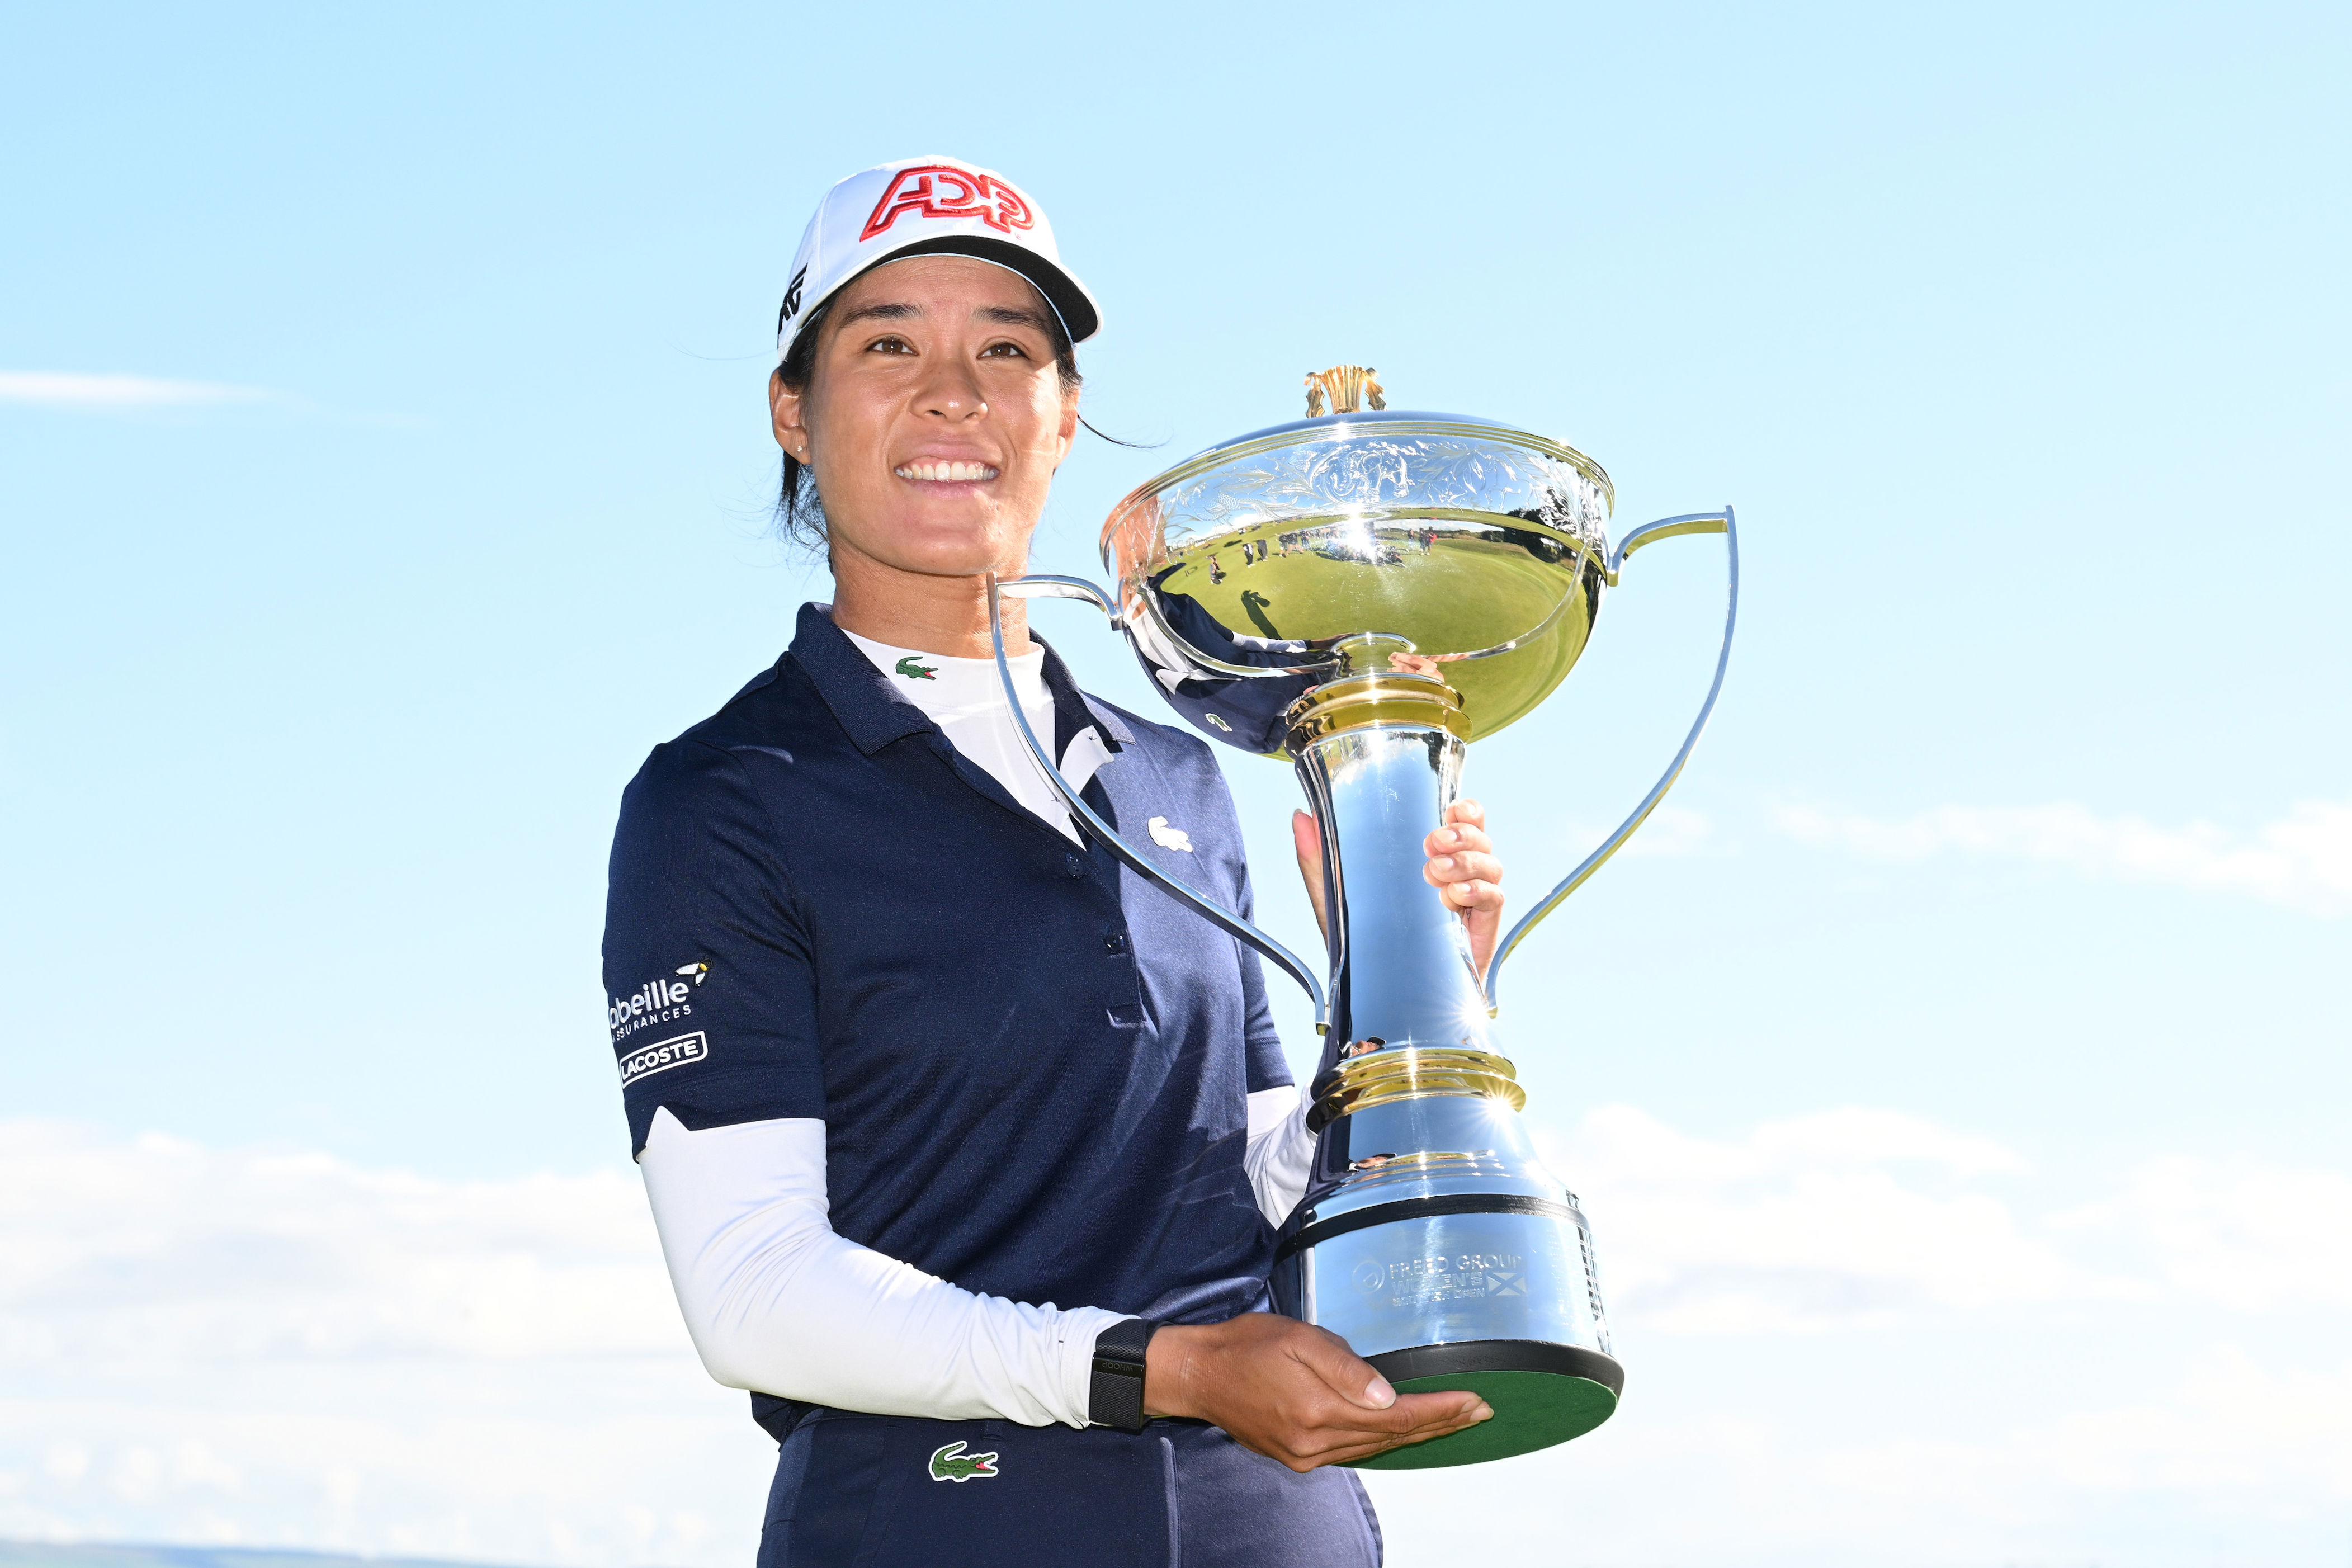 2023 Women's Scottish Open prize money payouts for each LPGA player